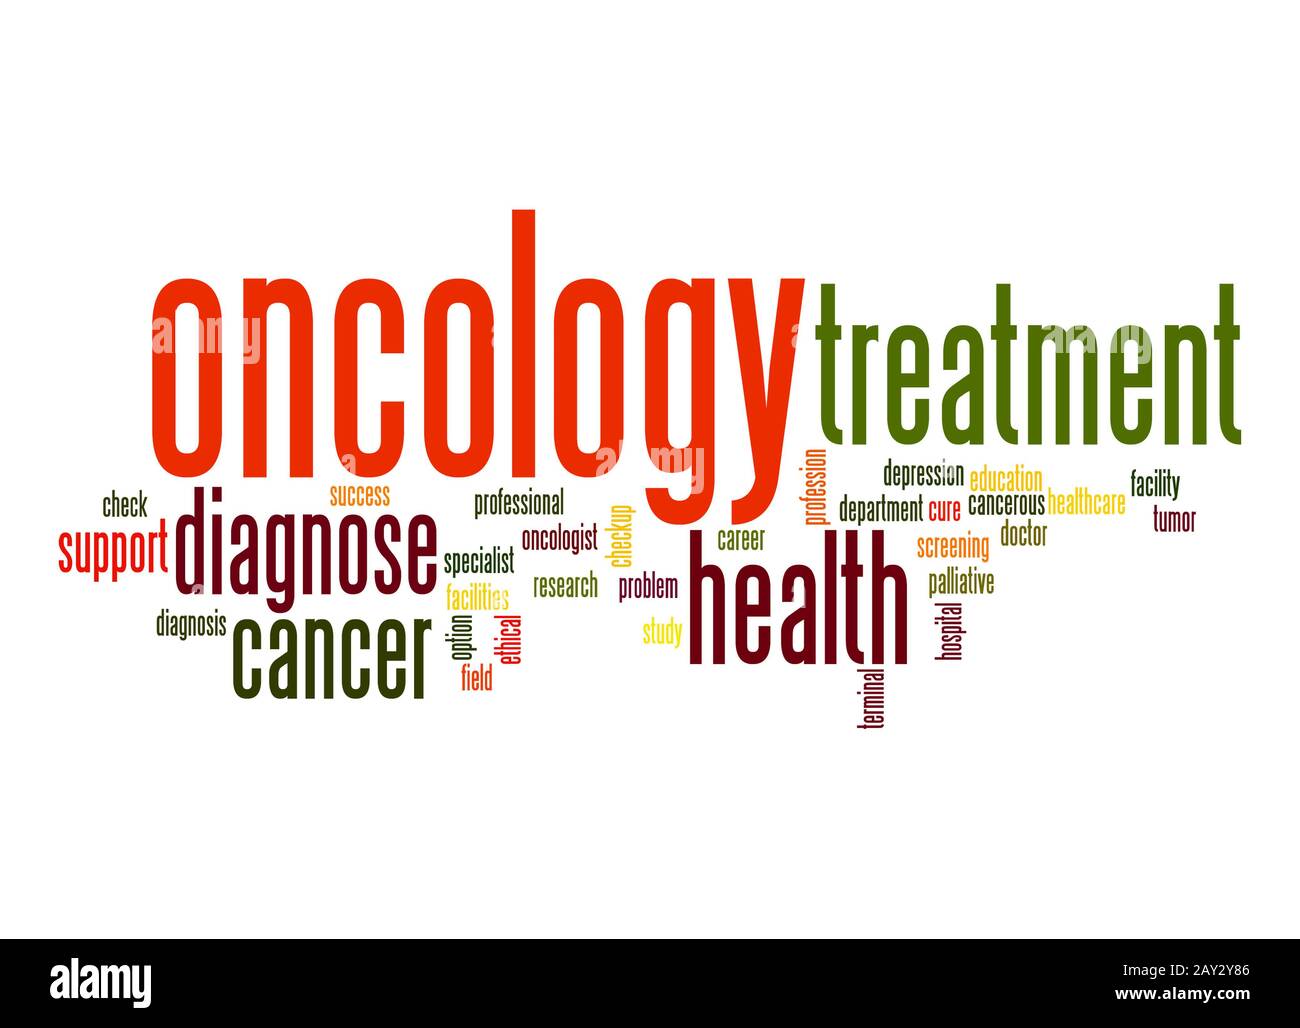 Oncology word cloud Stock Photo